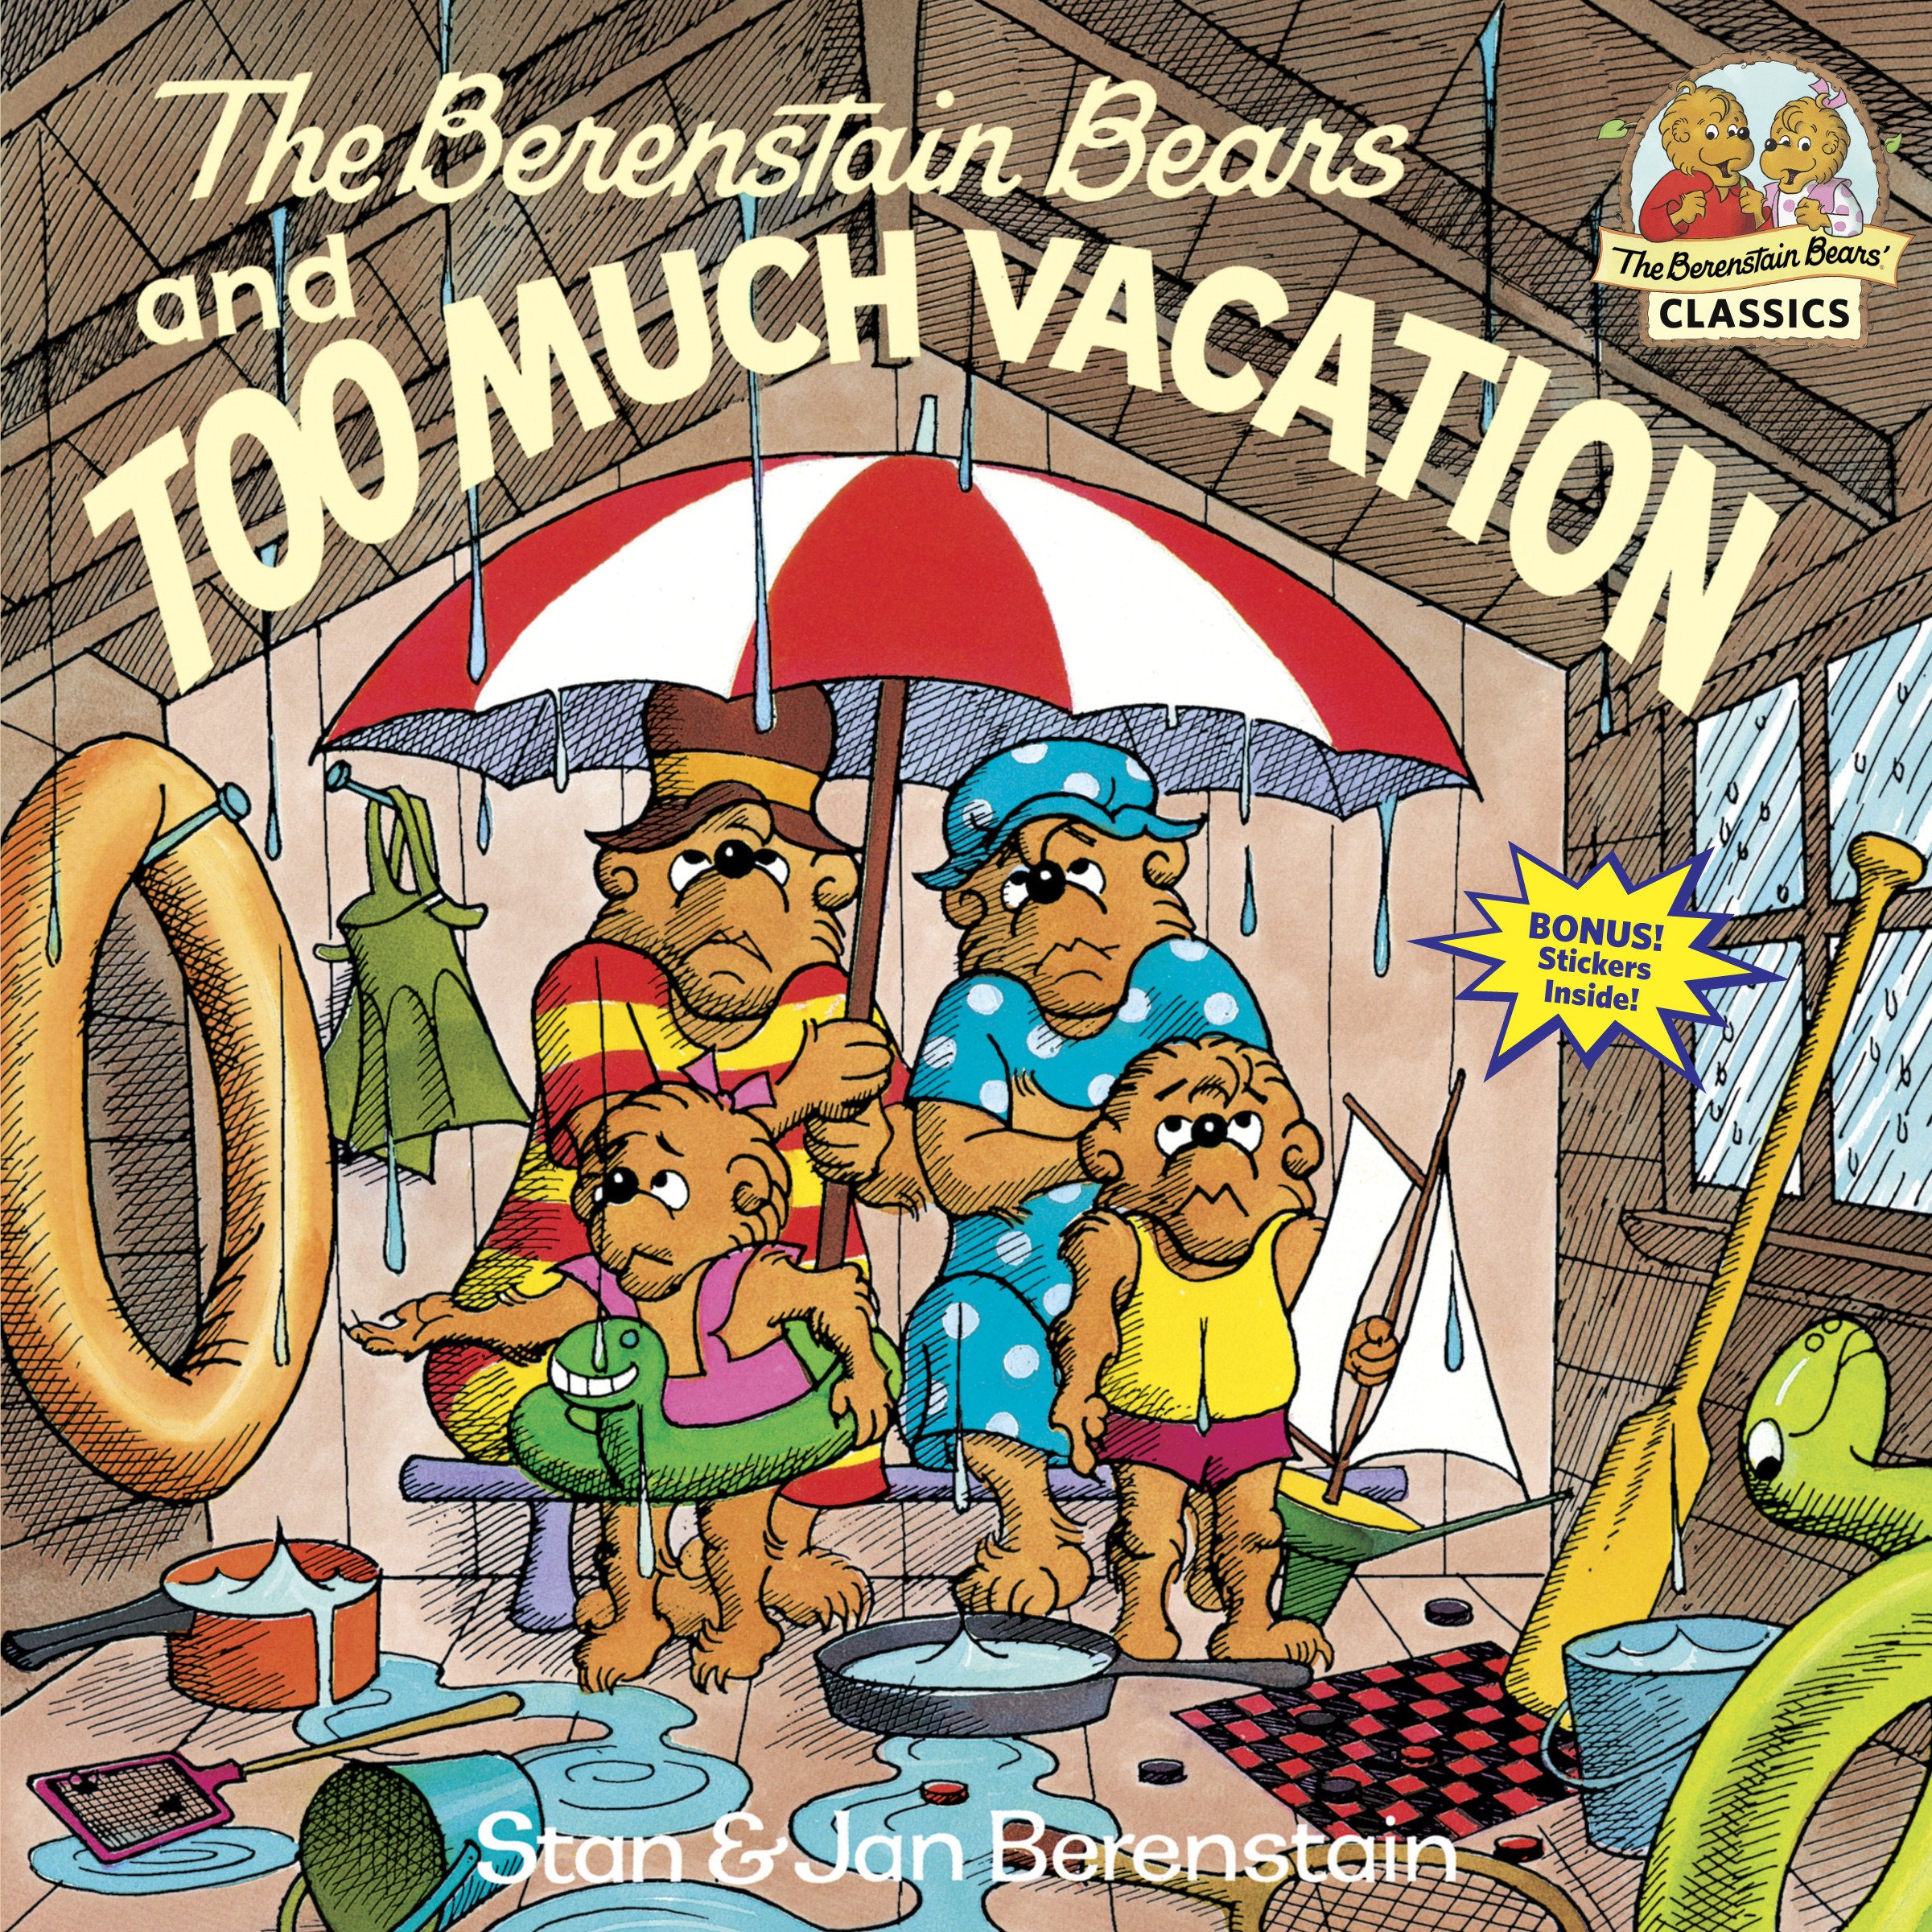 speech and language teaching concepts for The Berenstain Bears and Too Much Vacation in speech therapy